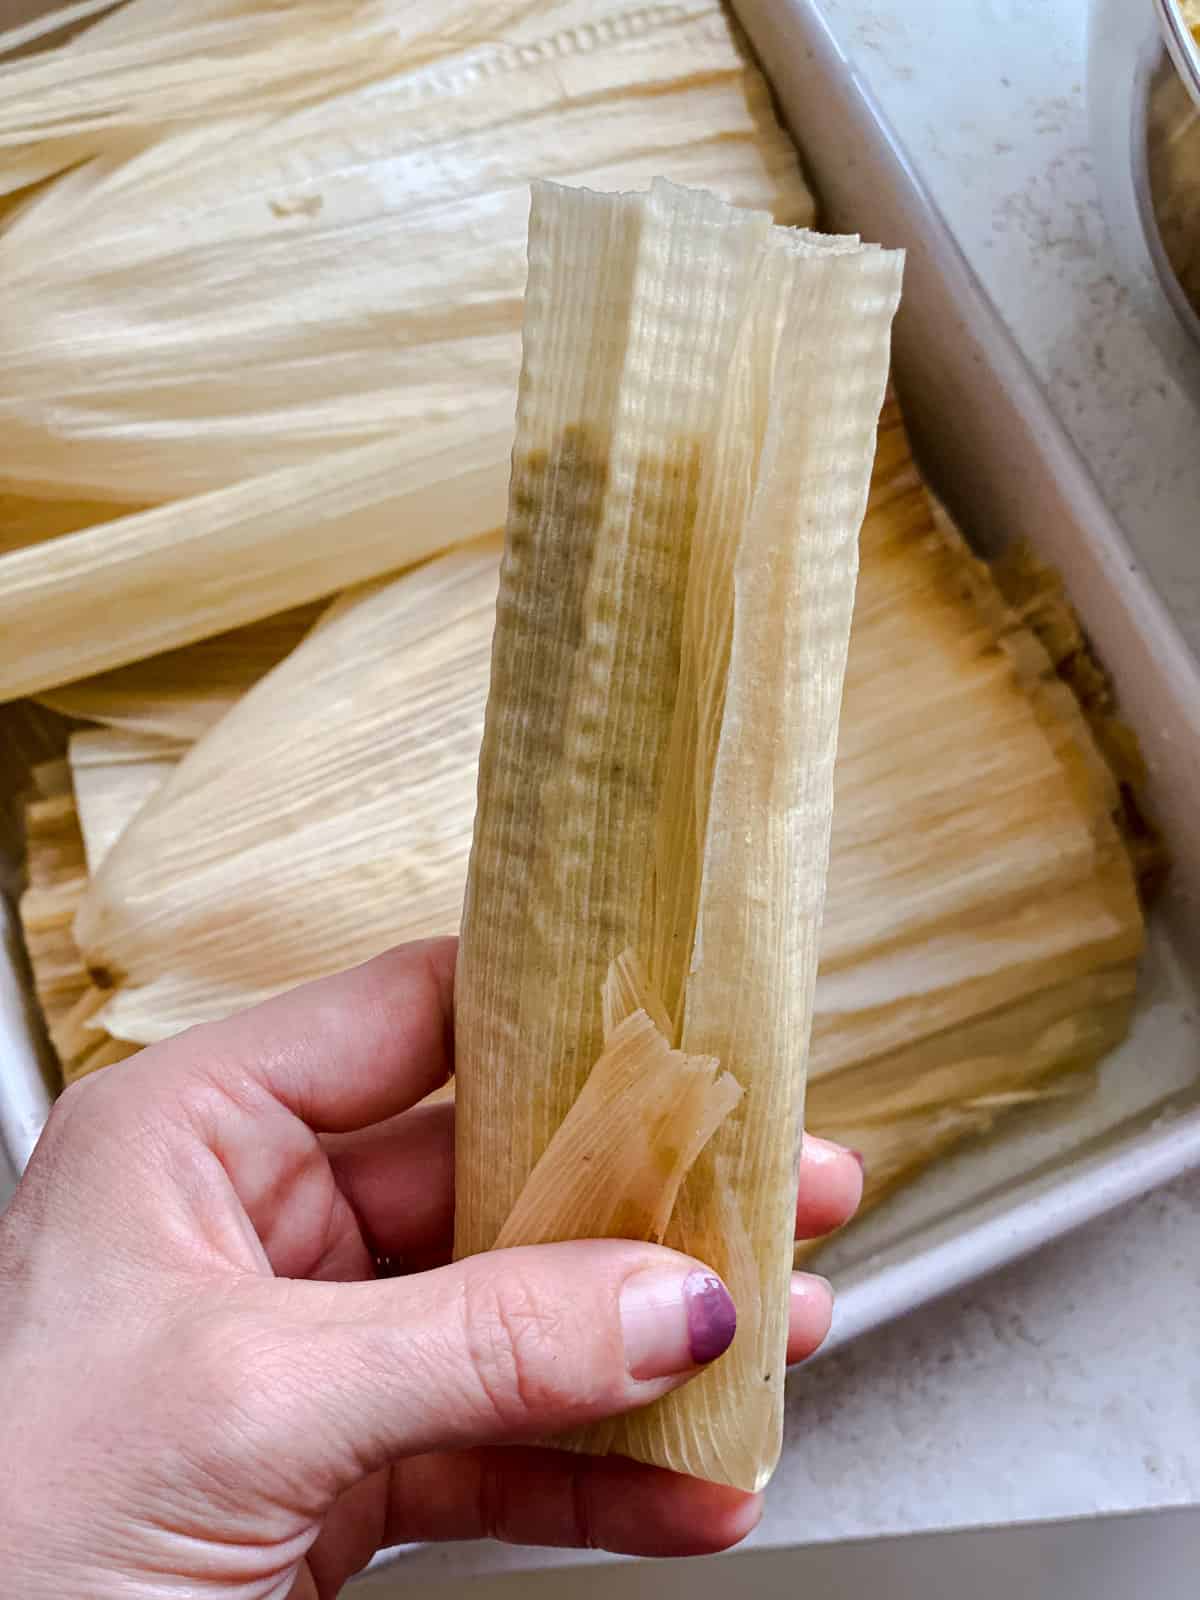 process s،t of rolling corn husk to ،ld tamales mixture